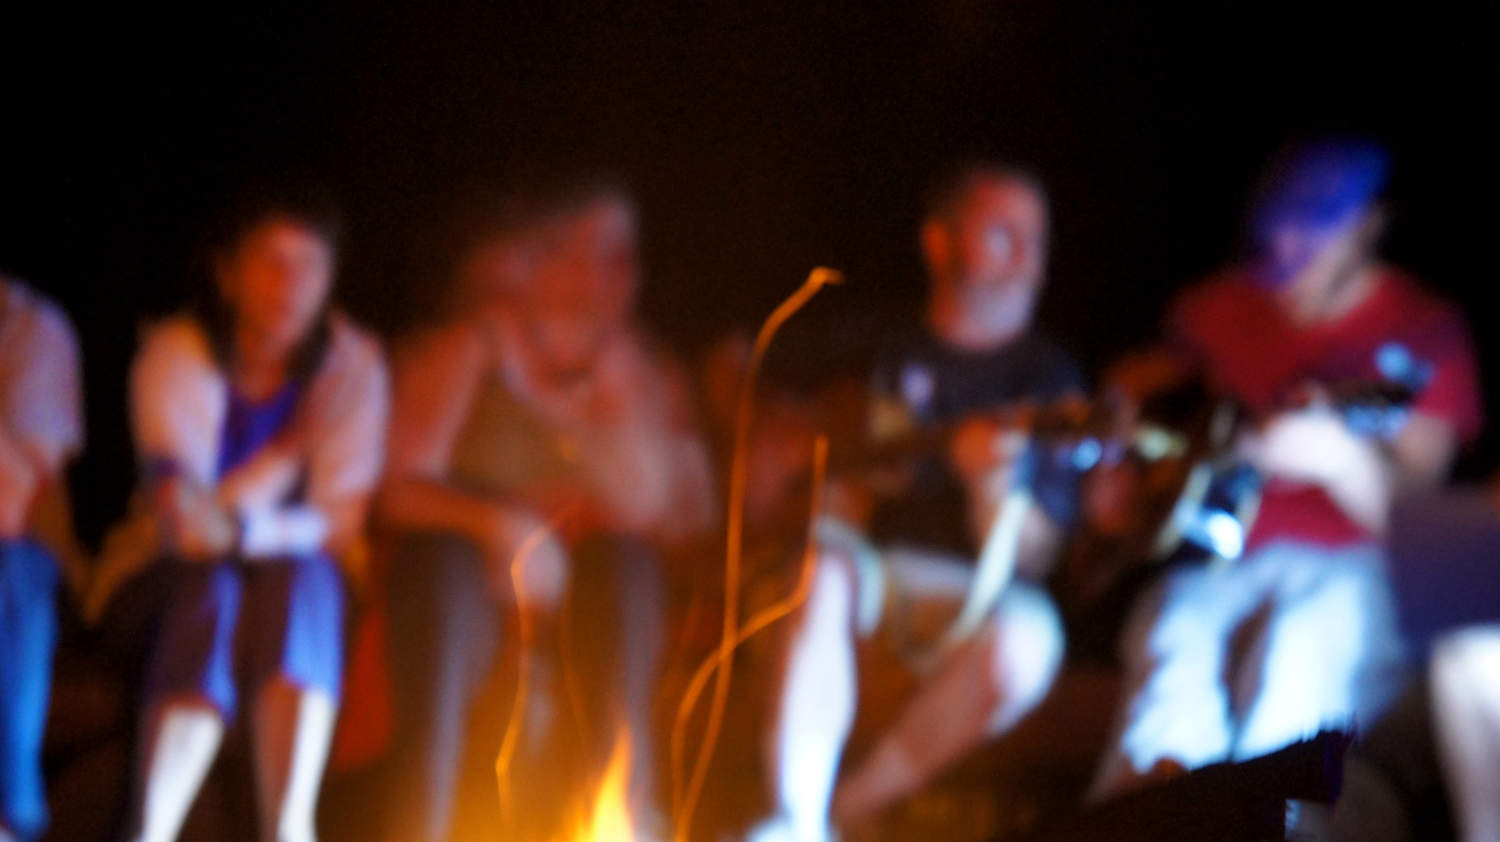 Guitar around the campfire in an intimate environment